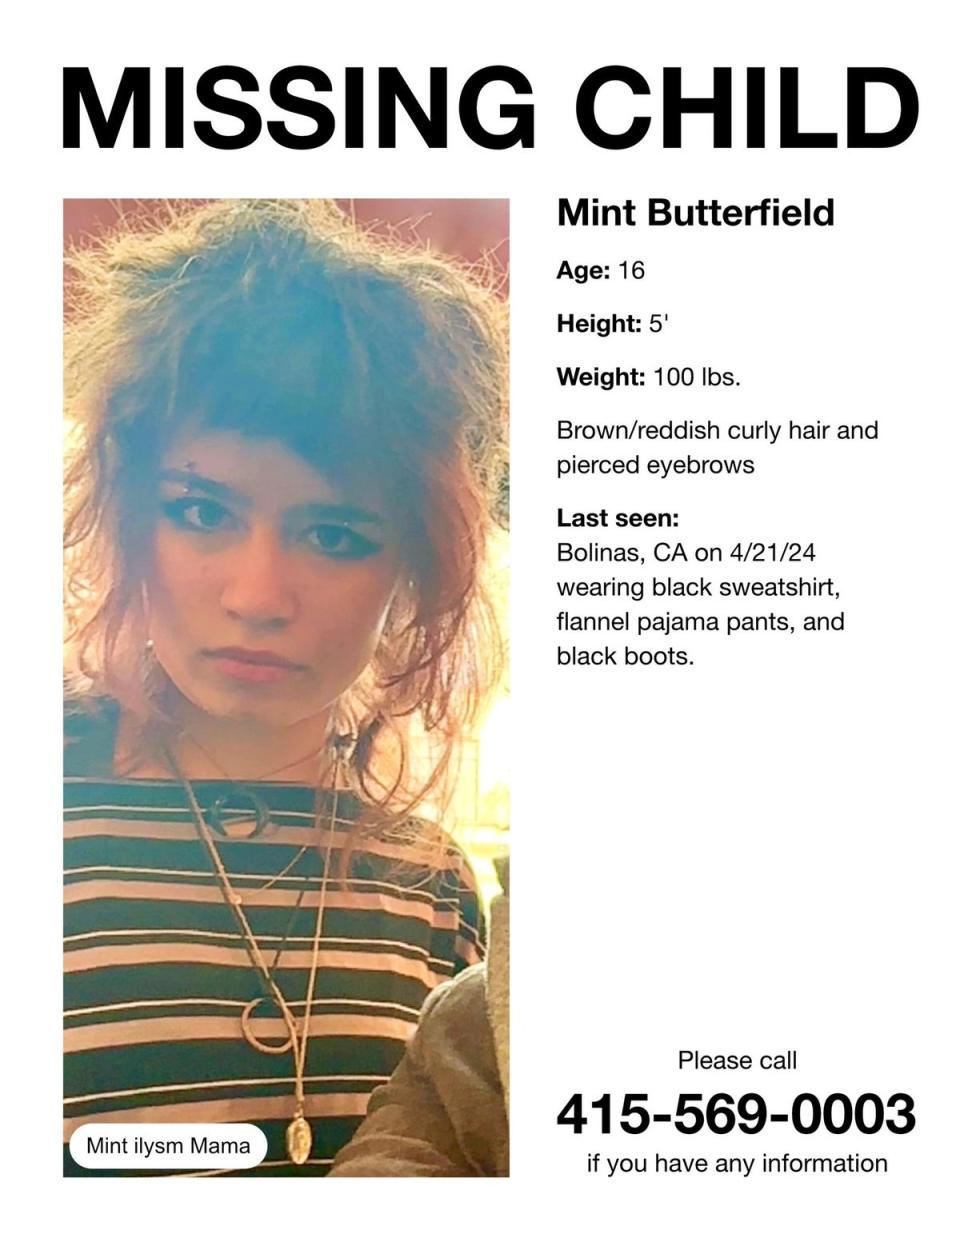 Mint Butterfield was reported missing on April 22